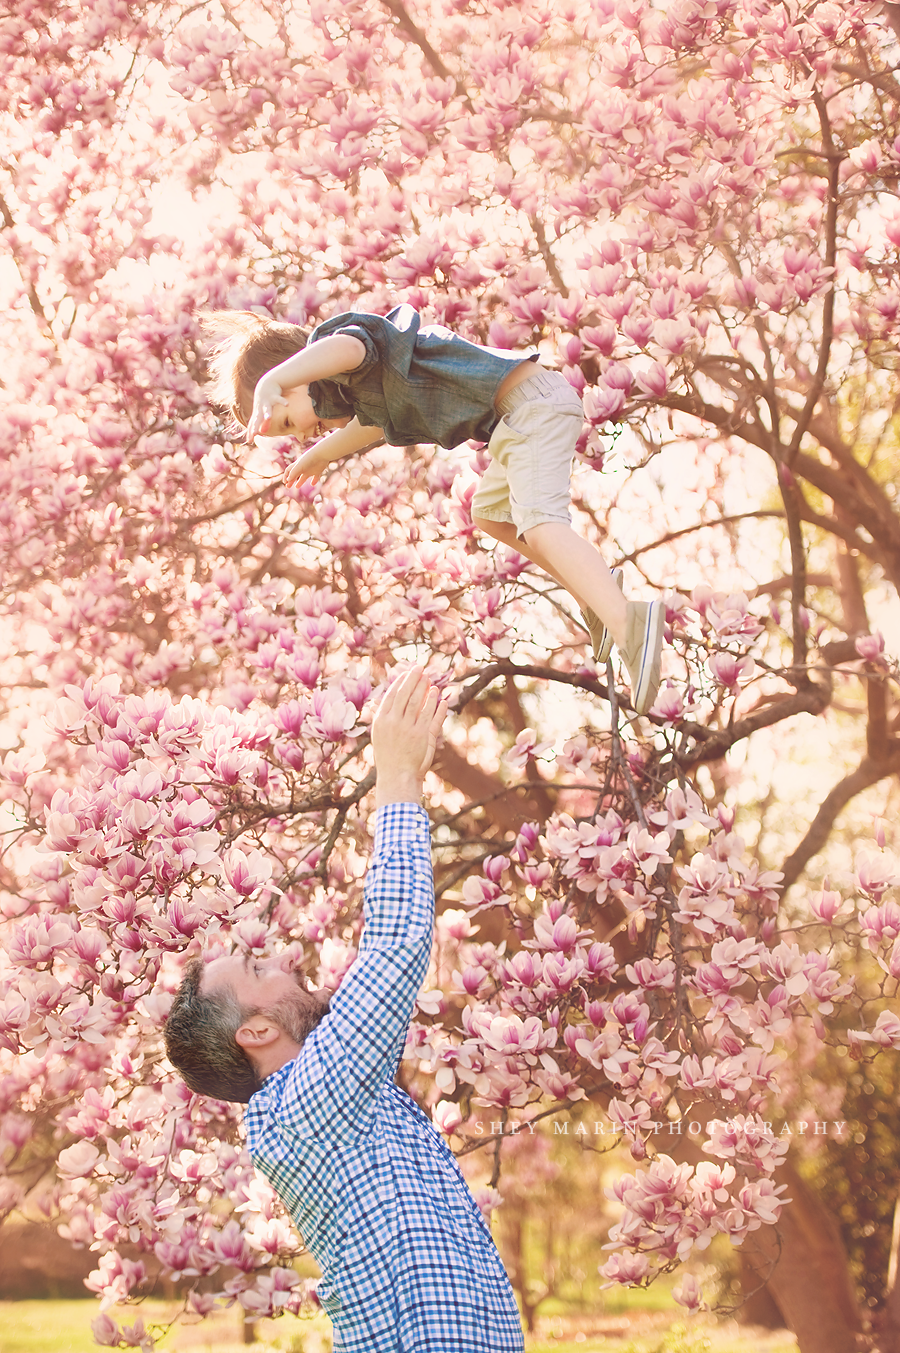 throwing child in the air amongst the spring blossoms